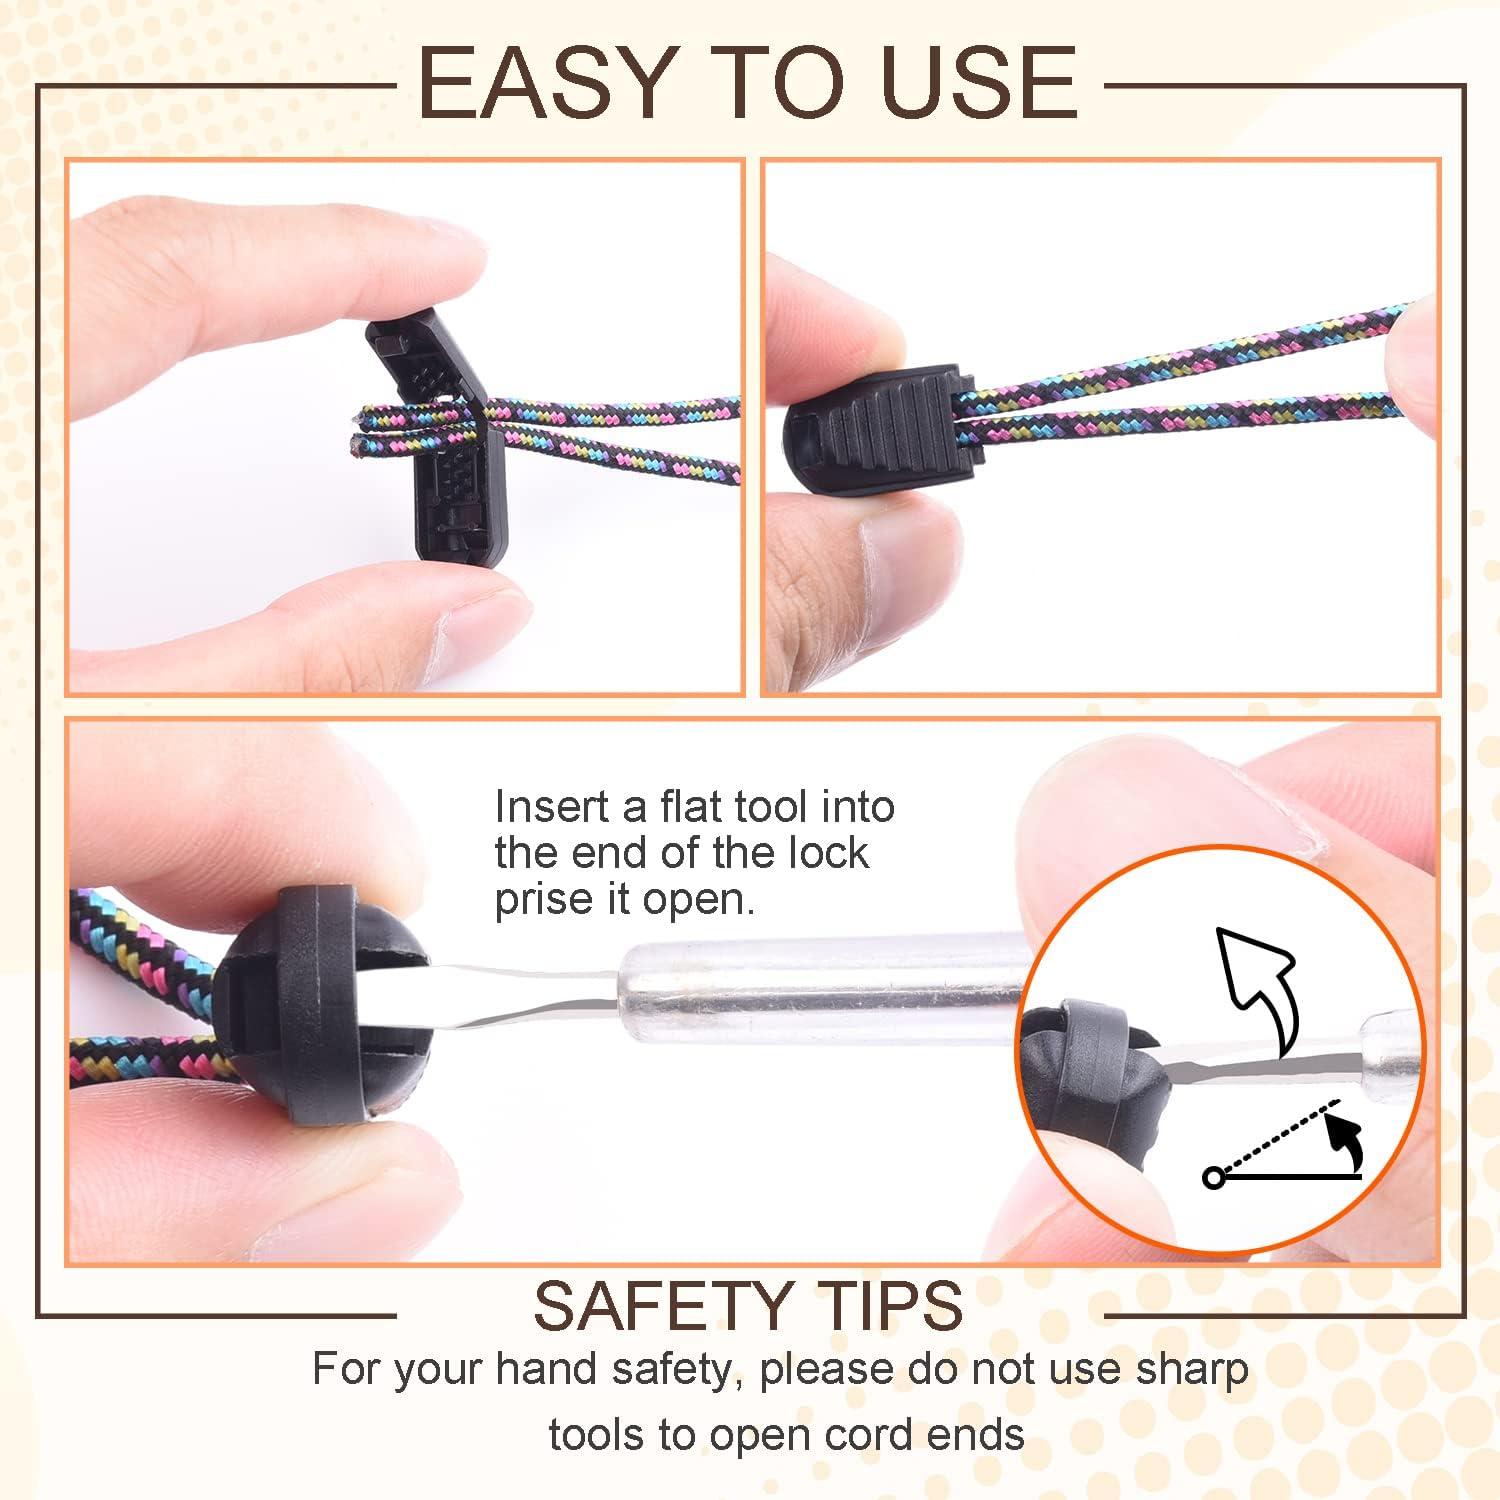 Fix Any Zipper Pull With a Zip Tie : 7 Steps (with Pictures